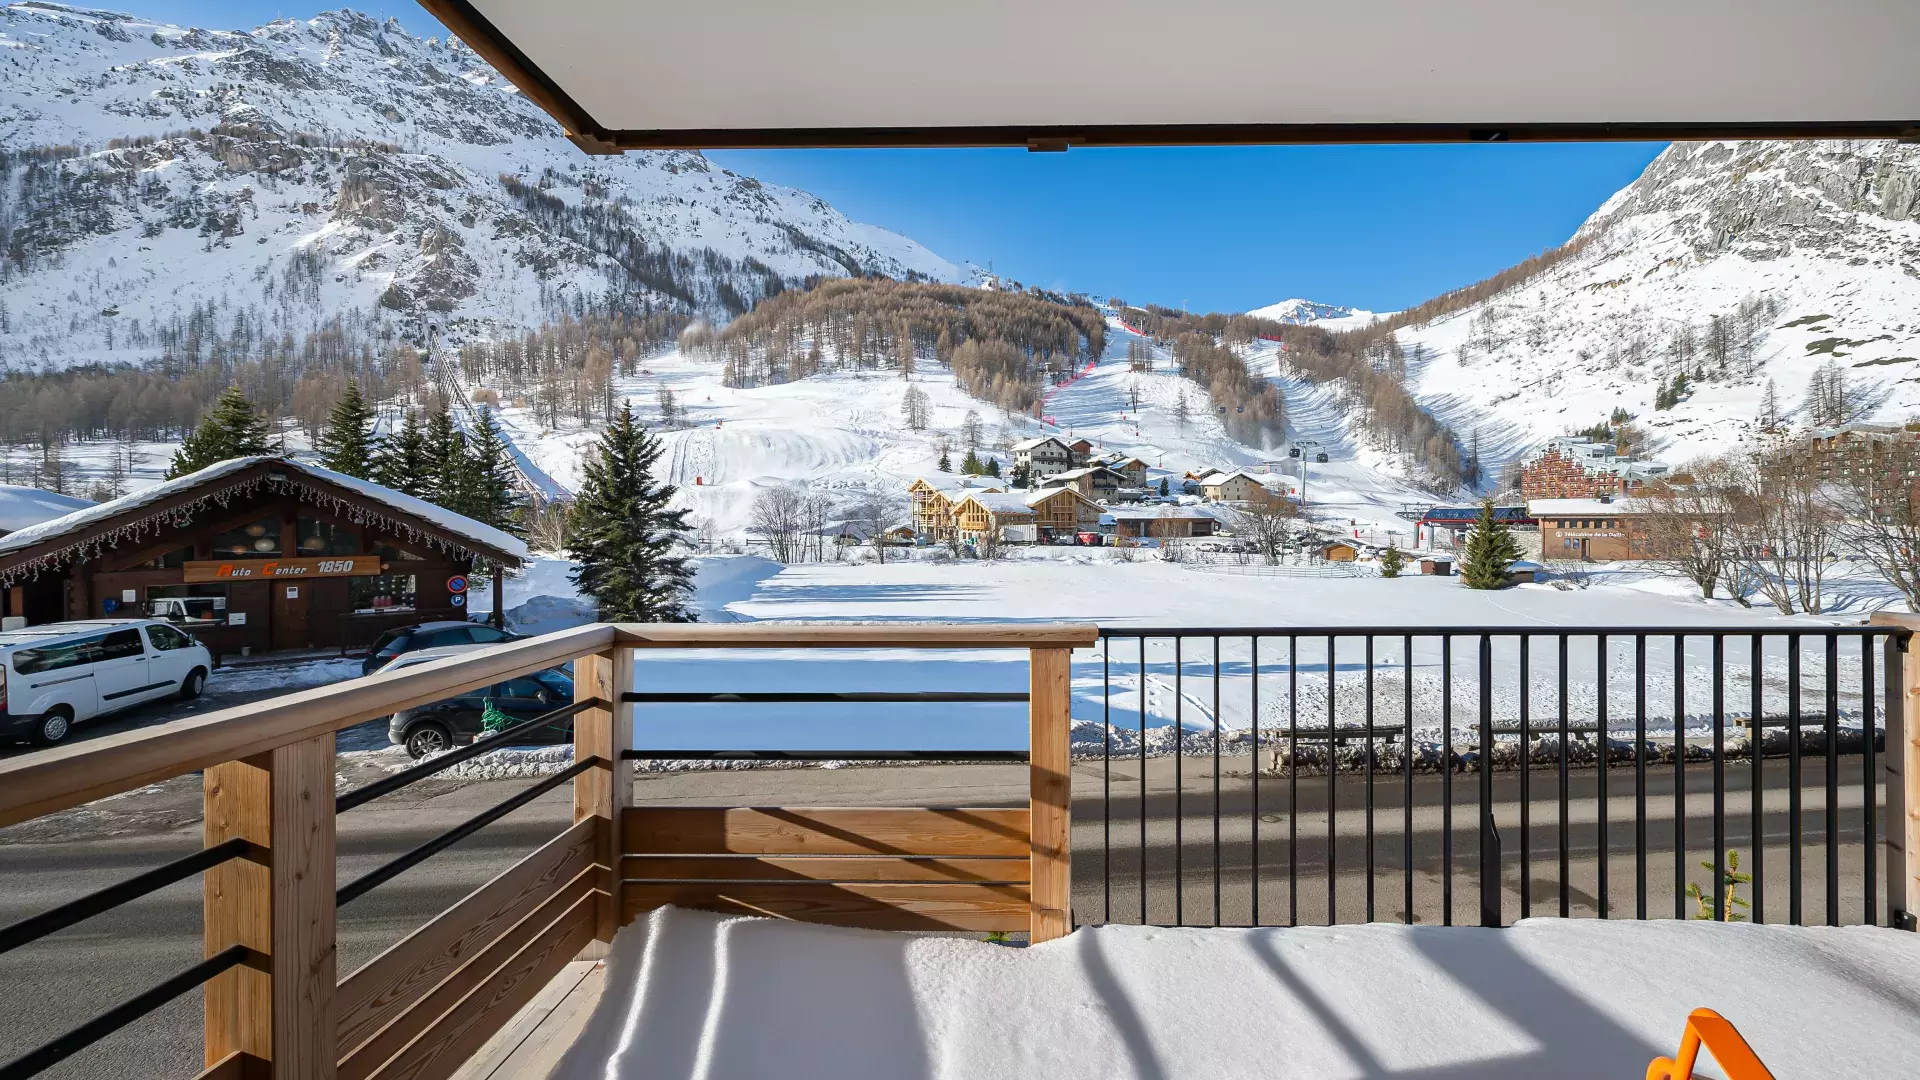 Appartement Sifflote 9 - Location chalets Covarel - Val d'Isère Alpes - France - Terrasse